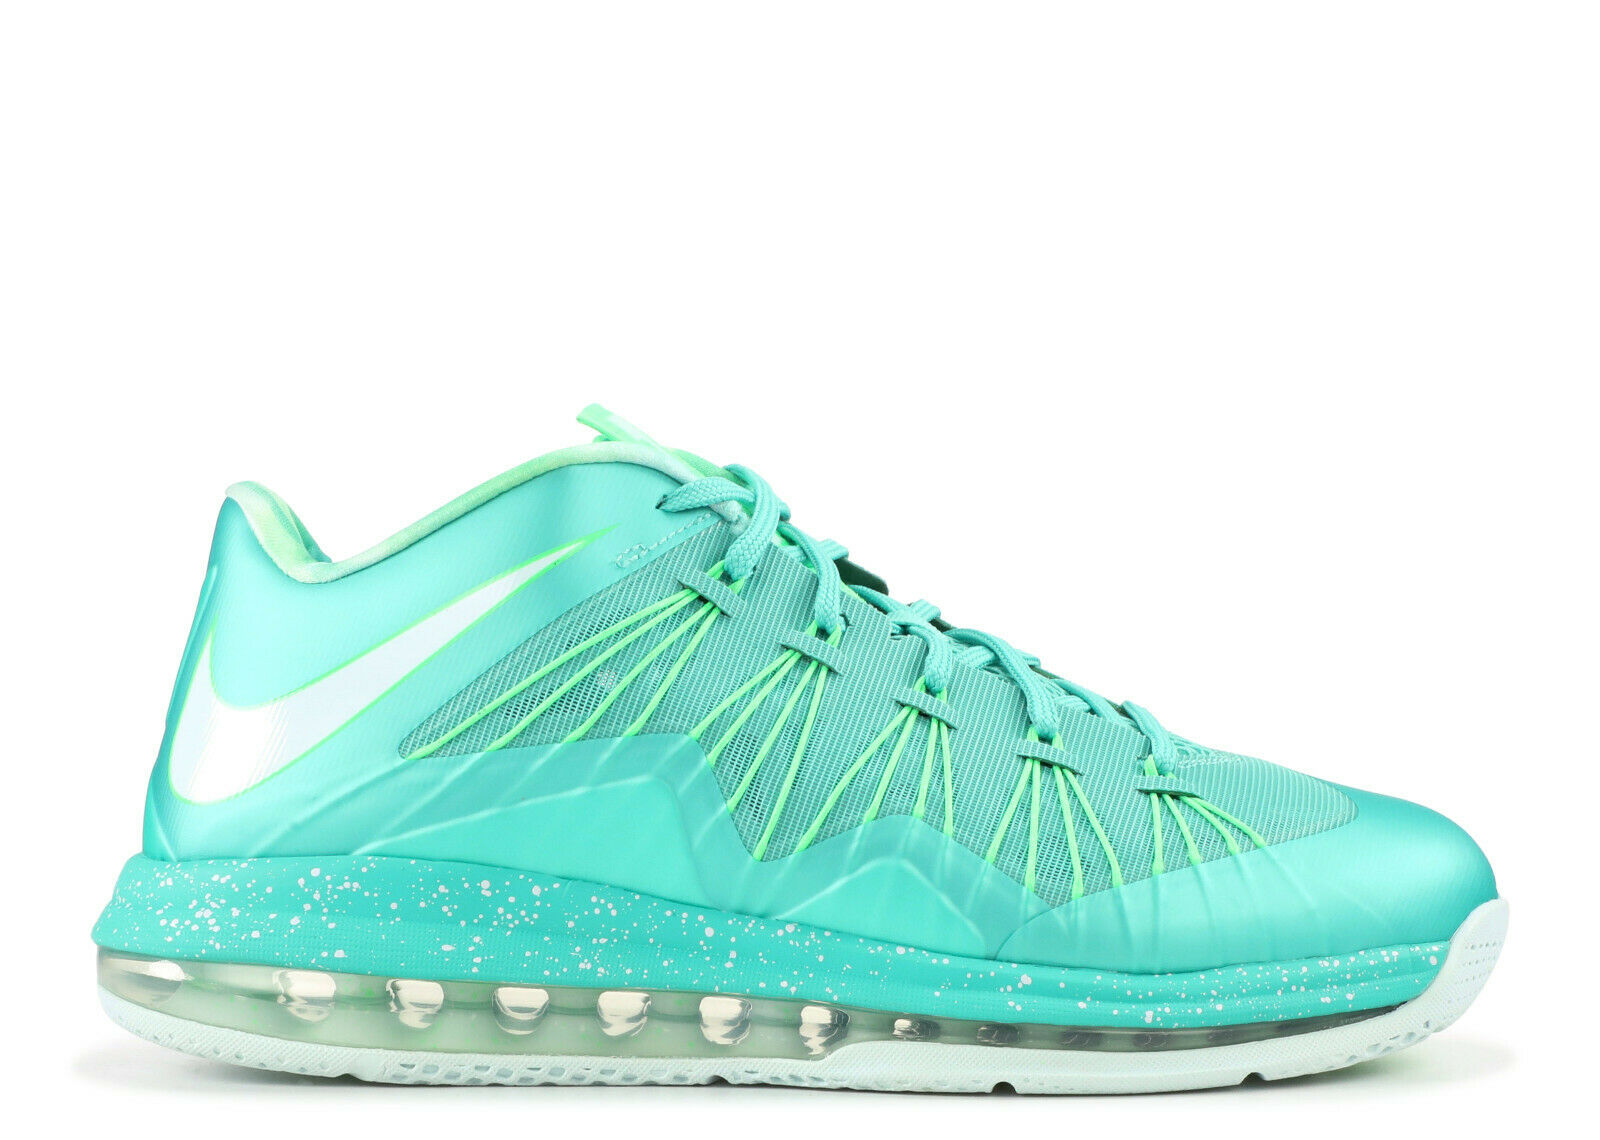 Mens Nike Air Max Lebron 10 Low 579765 300 Easter Green X Mint Crystal (8.5) - image 1 of 1